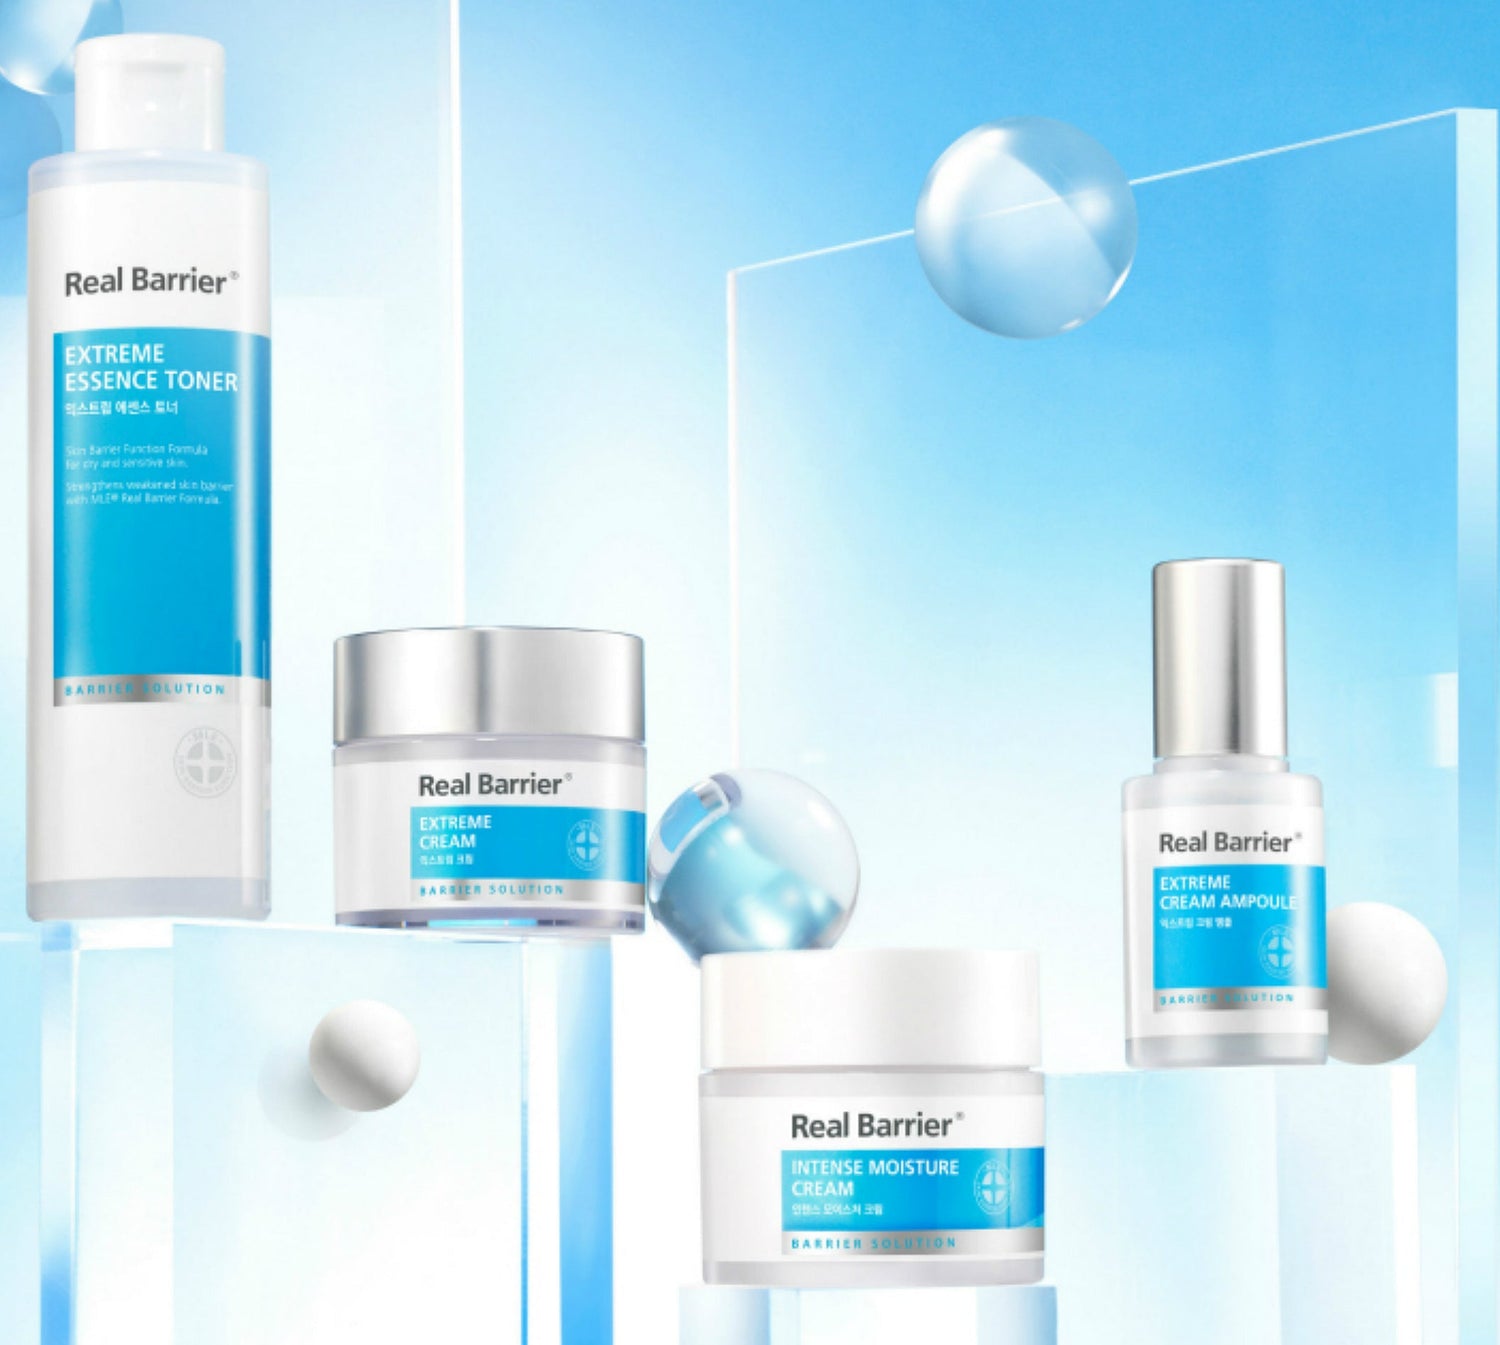 Real Barrier skincare products for ultra hydration